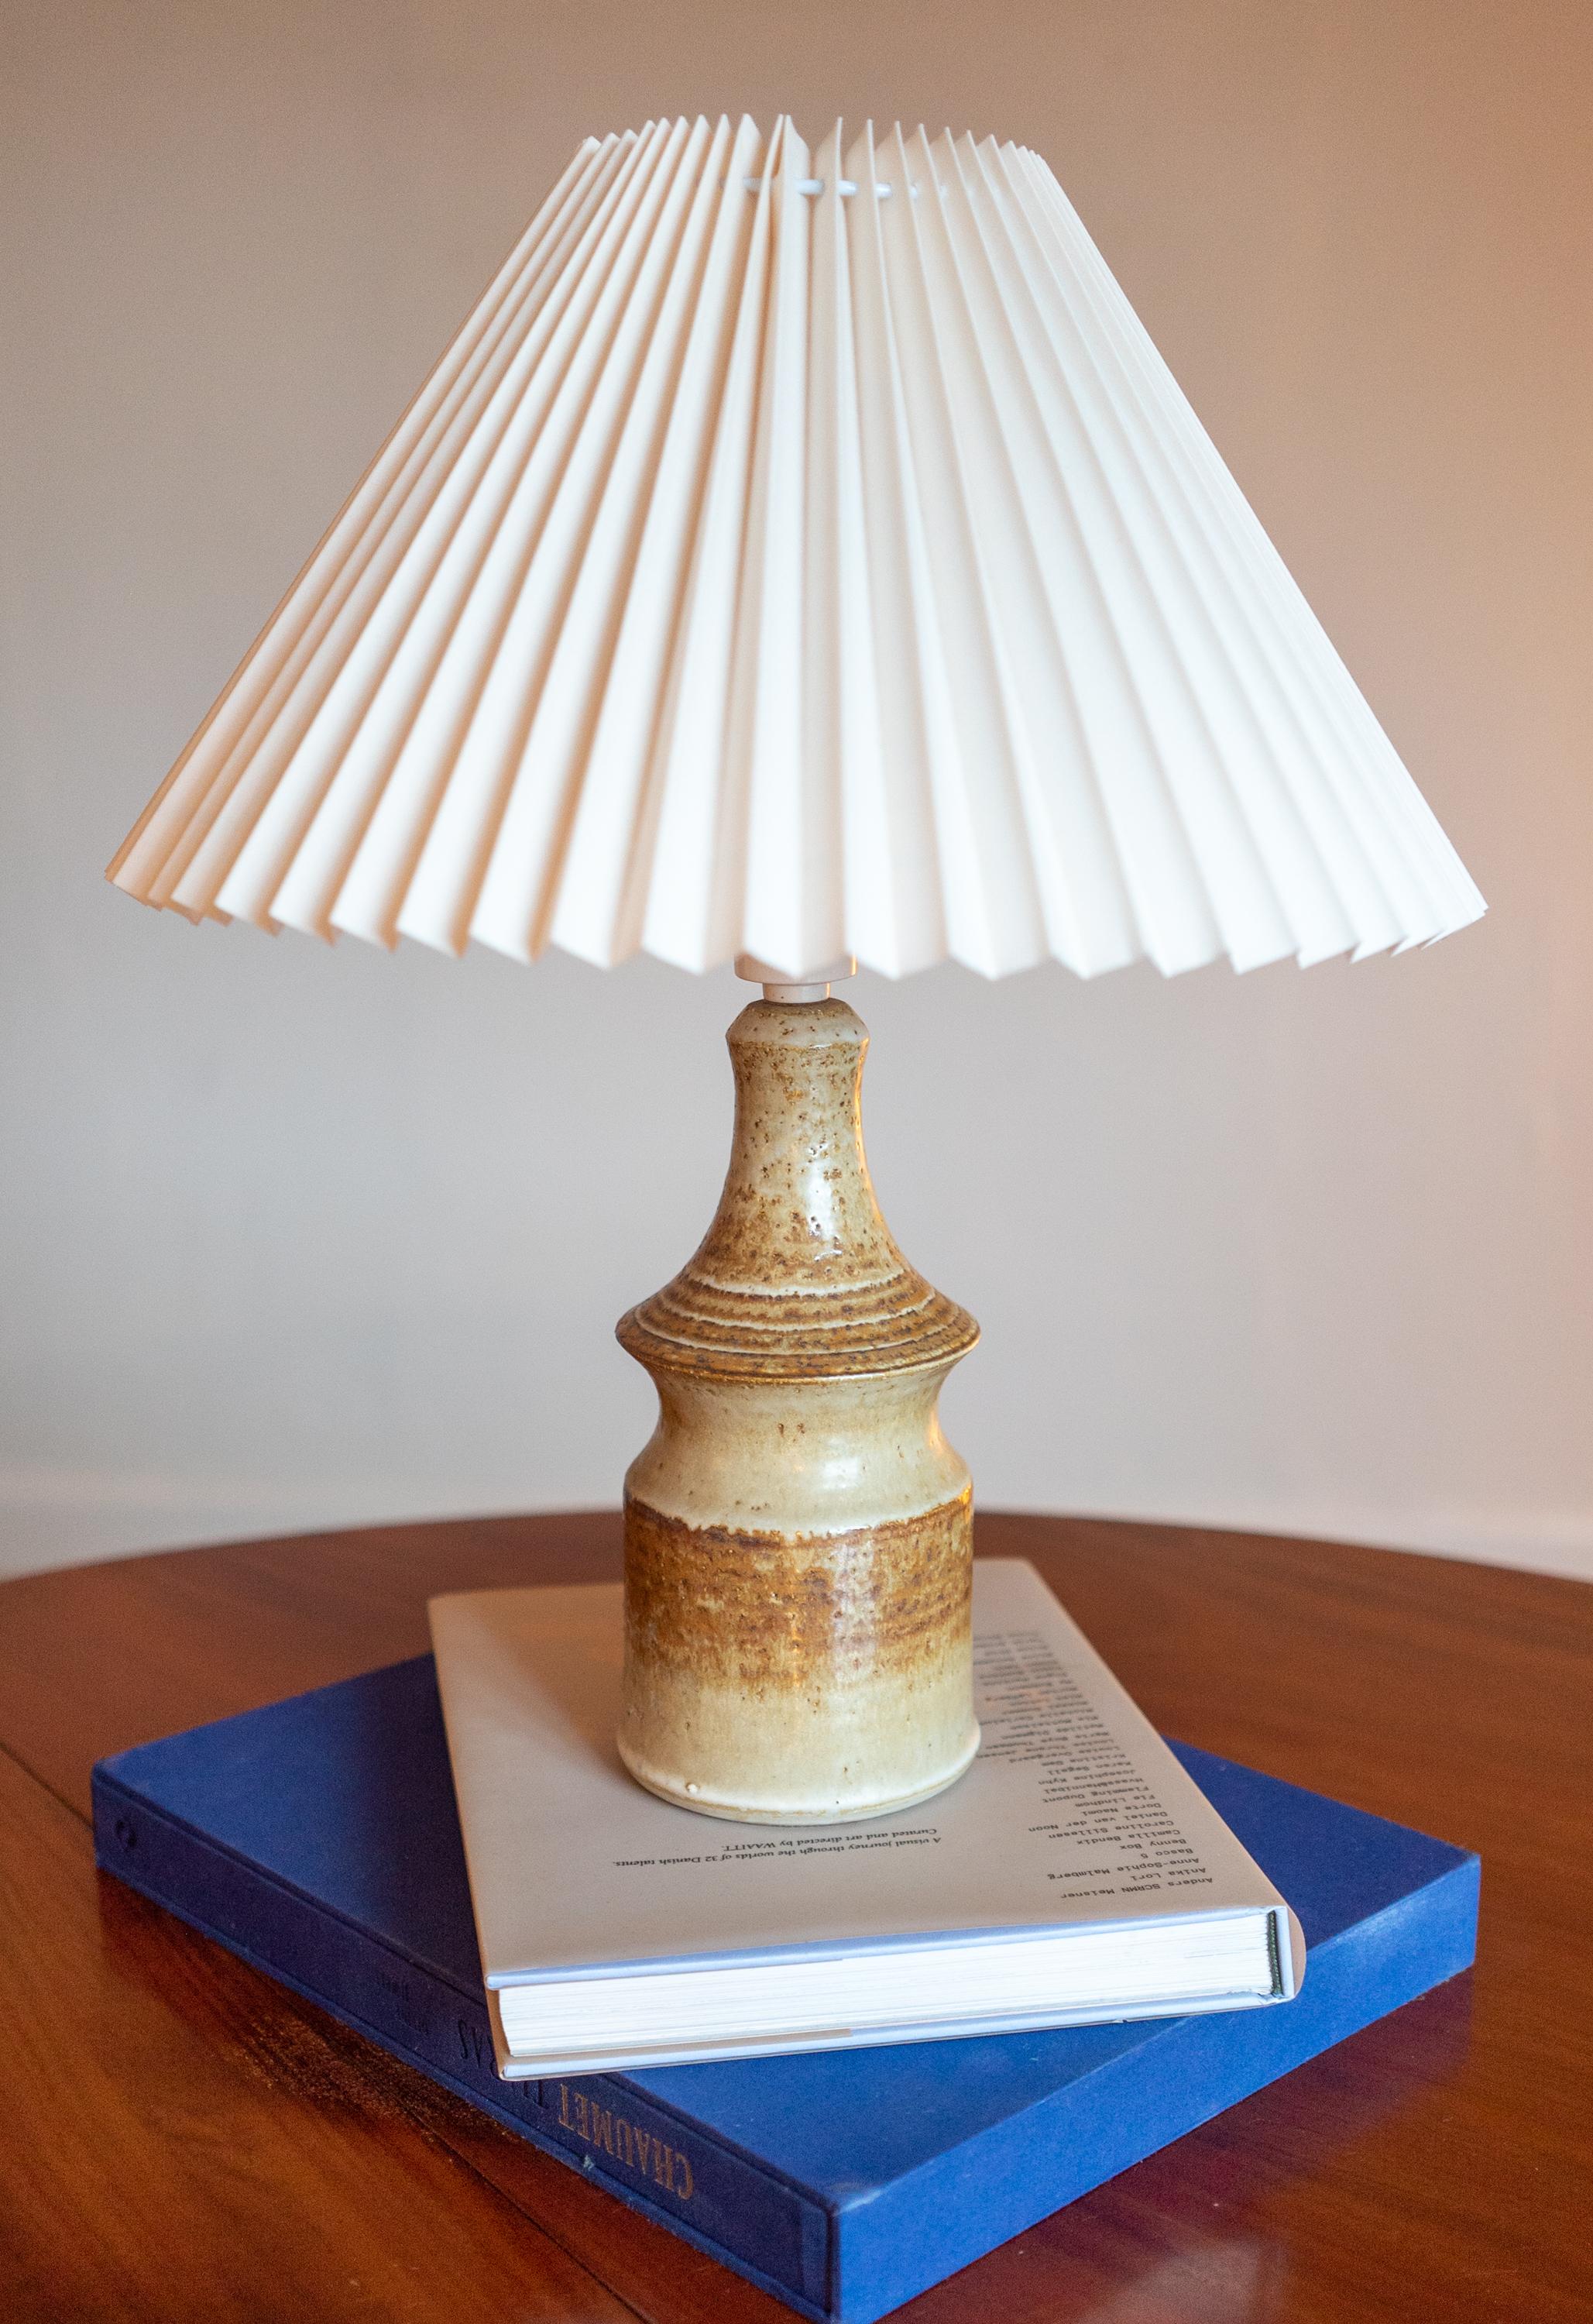 A stoneware table lamp handmade by Joseph Simon for Danish Søholm located on the island of Bornholm in Denmark in the 1960s.

Glaze features brown. Stamped and signed on base.

Sold without lampshade. Height includes socket. fully functional and